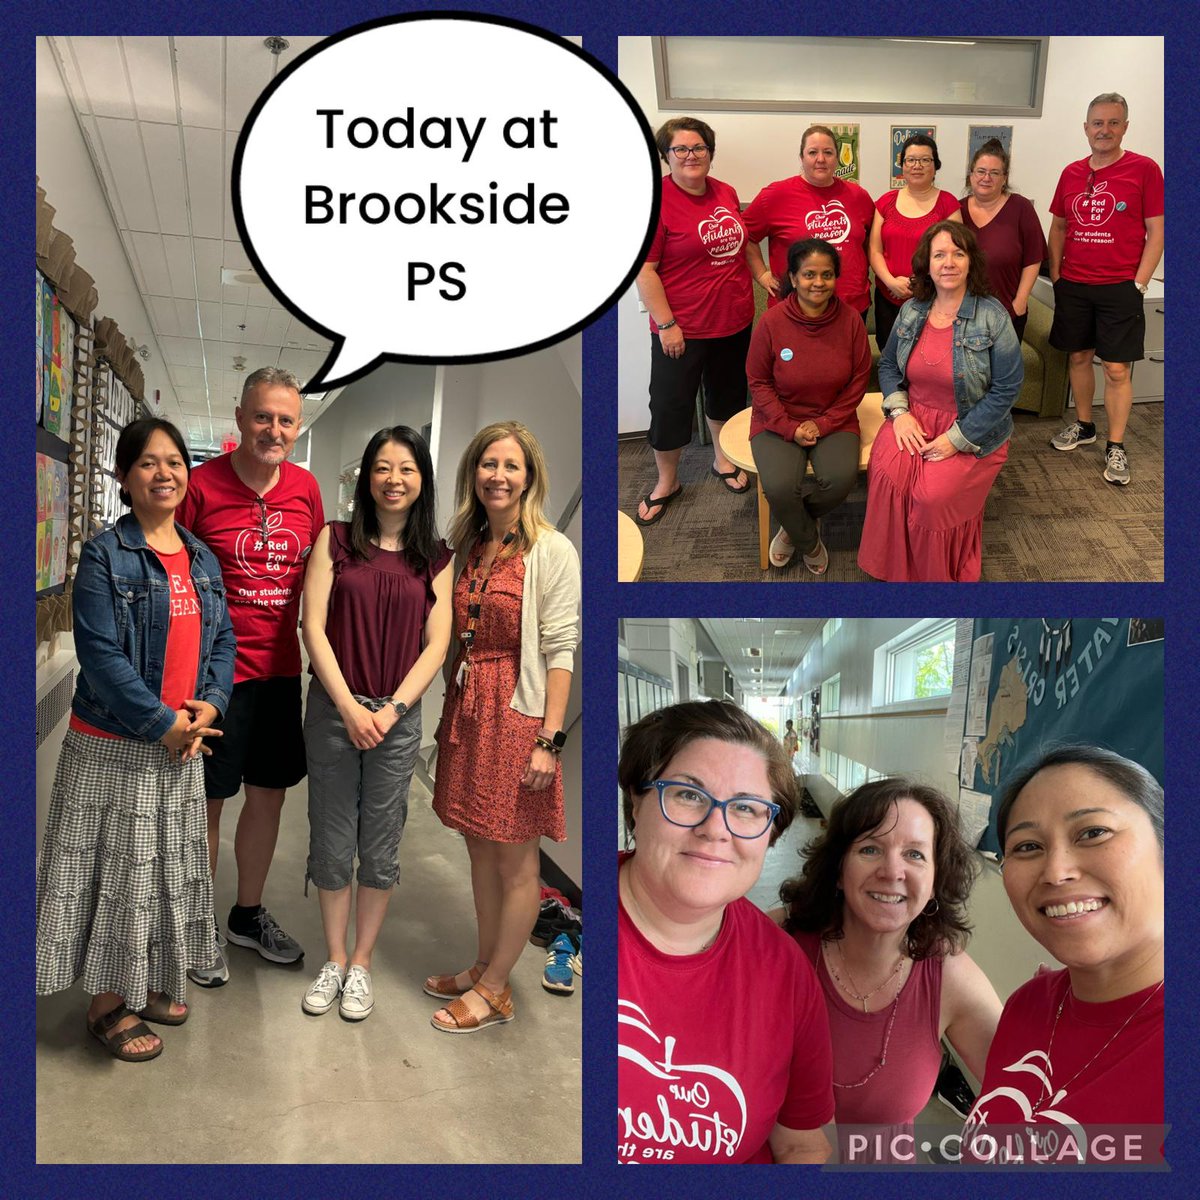 Check out the amazing @ElemTeachersTO members & teachers at Brookside PS - united in their #ETTRedforEd! It's cause they know that better working conditions are the foundation for better learning conditions. #EducationUnafraid